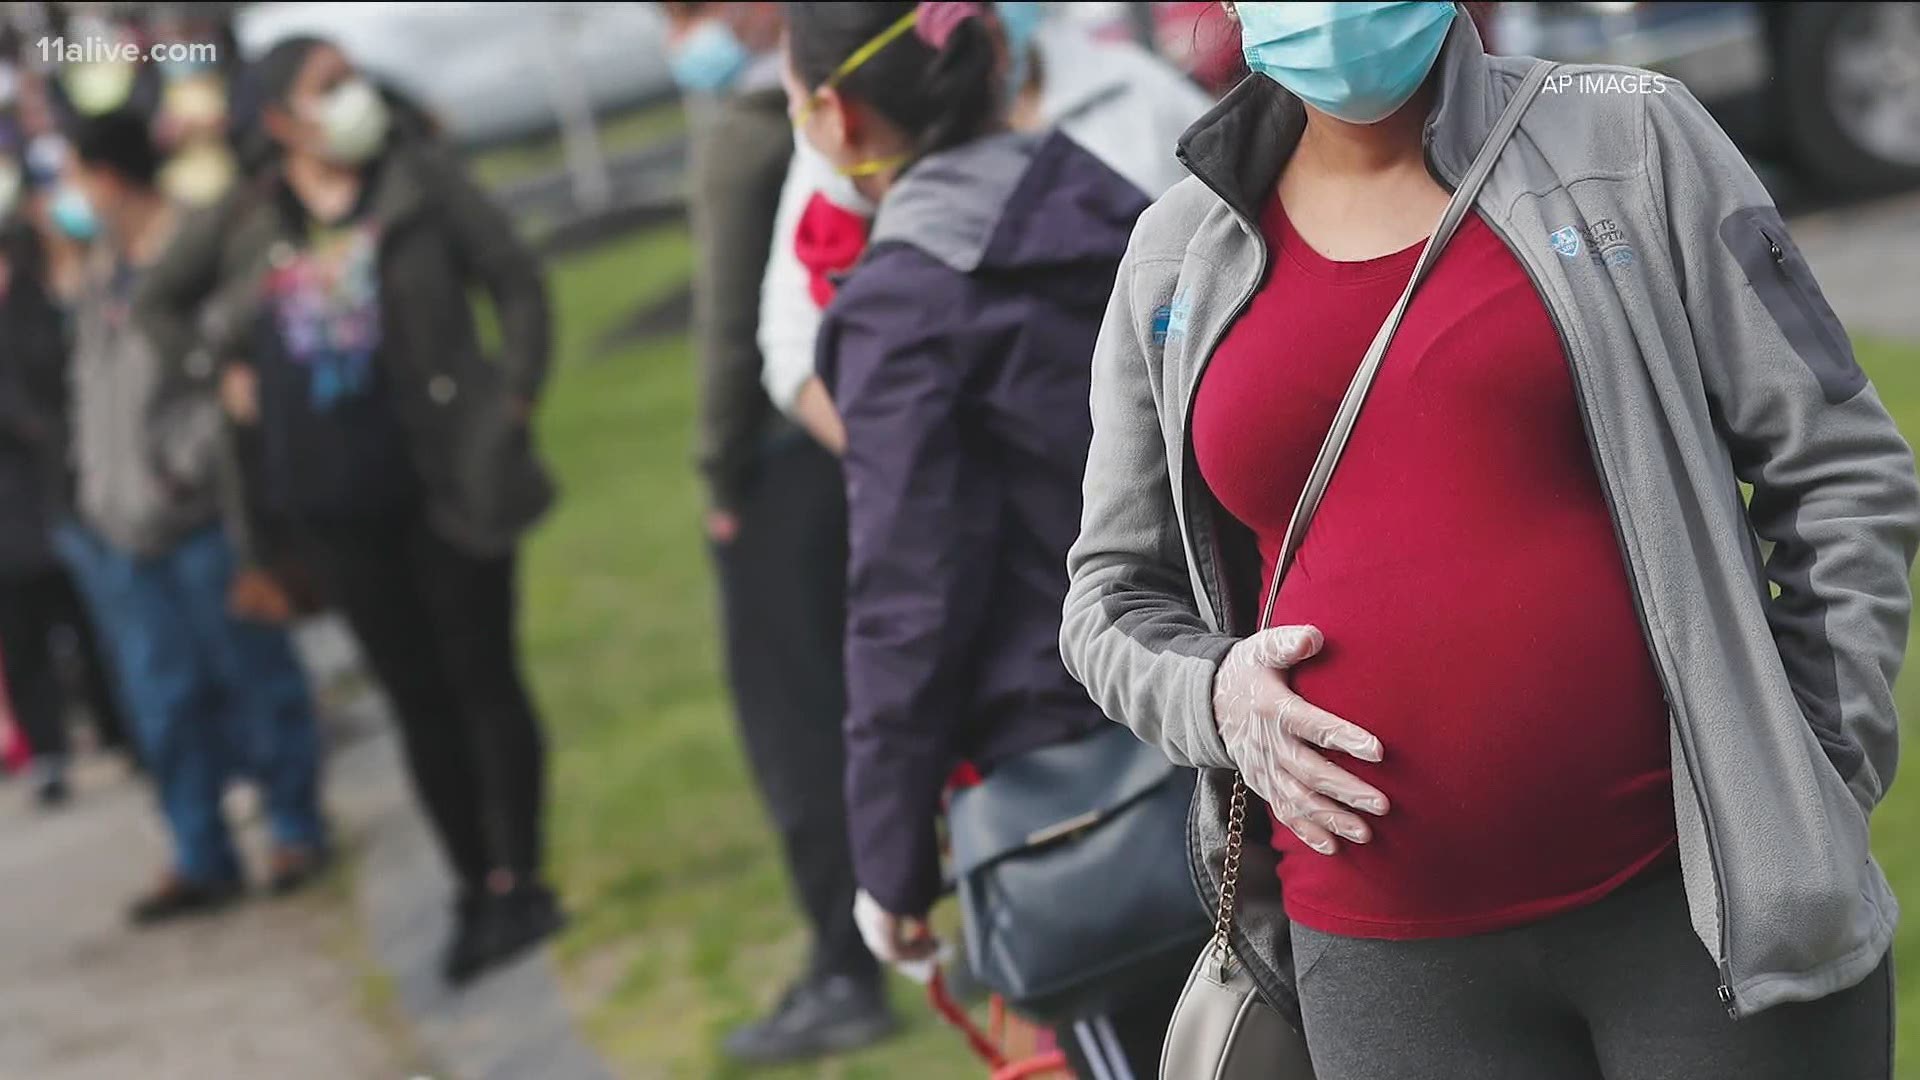 11Alive spoke with an Emory doctor and a mom about what it's like to be pregnant during a pandemic.